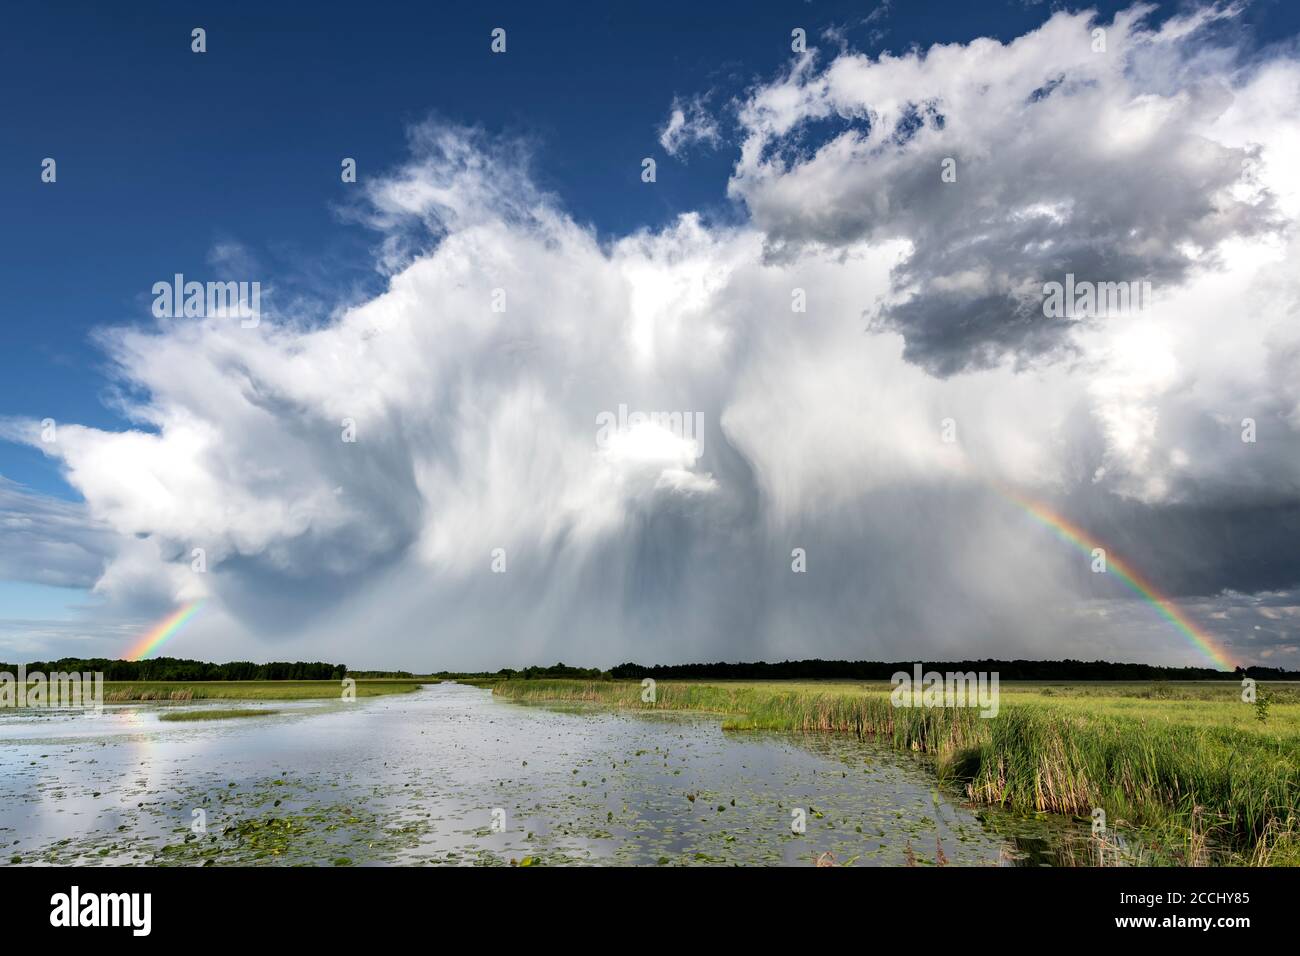 Cumulus congestus clouds and fractured rainbow, Crex Meadows WMA, WI, USA, by Dominique Braud/Dembinsky Photo Assoc Stock Photo